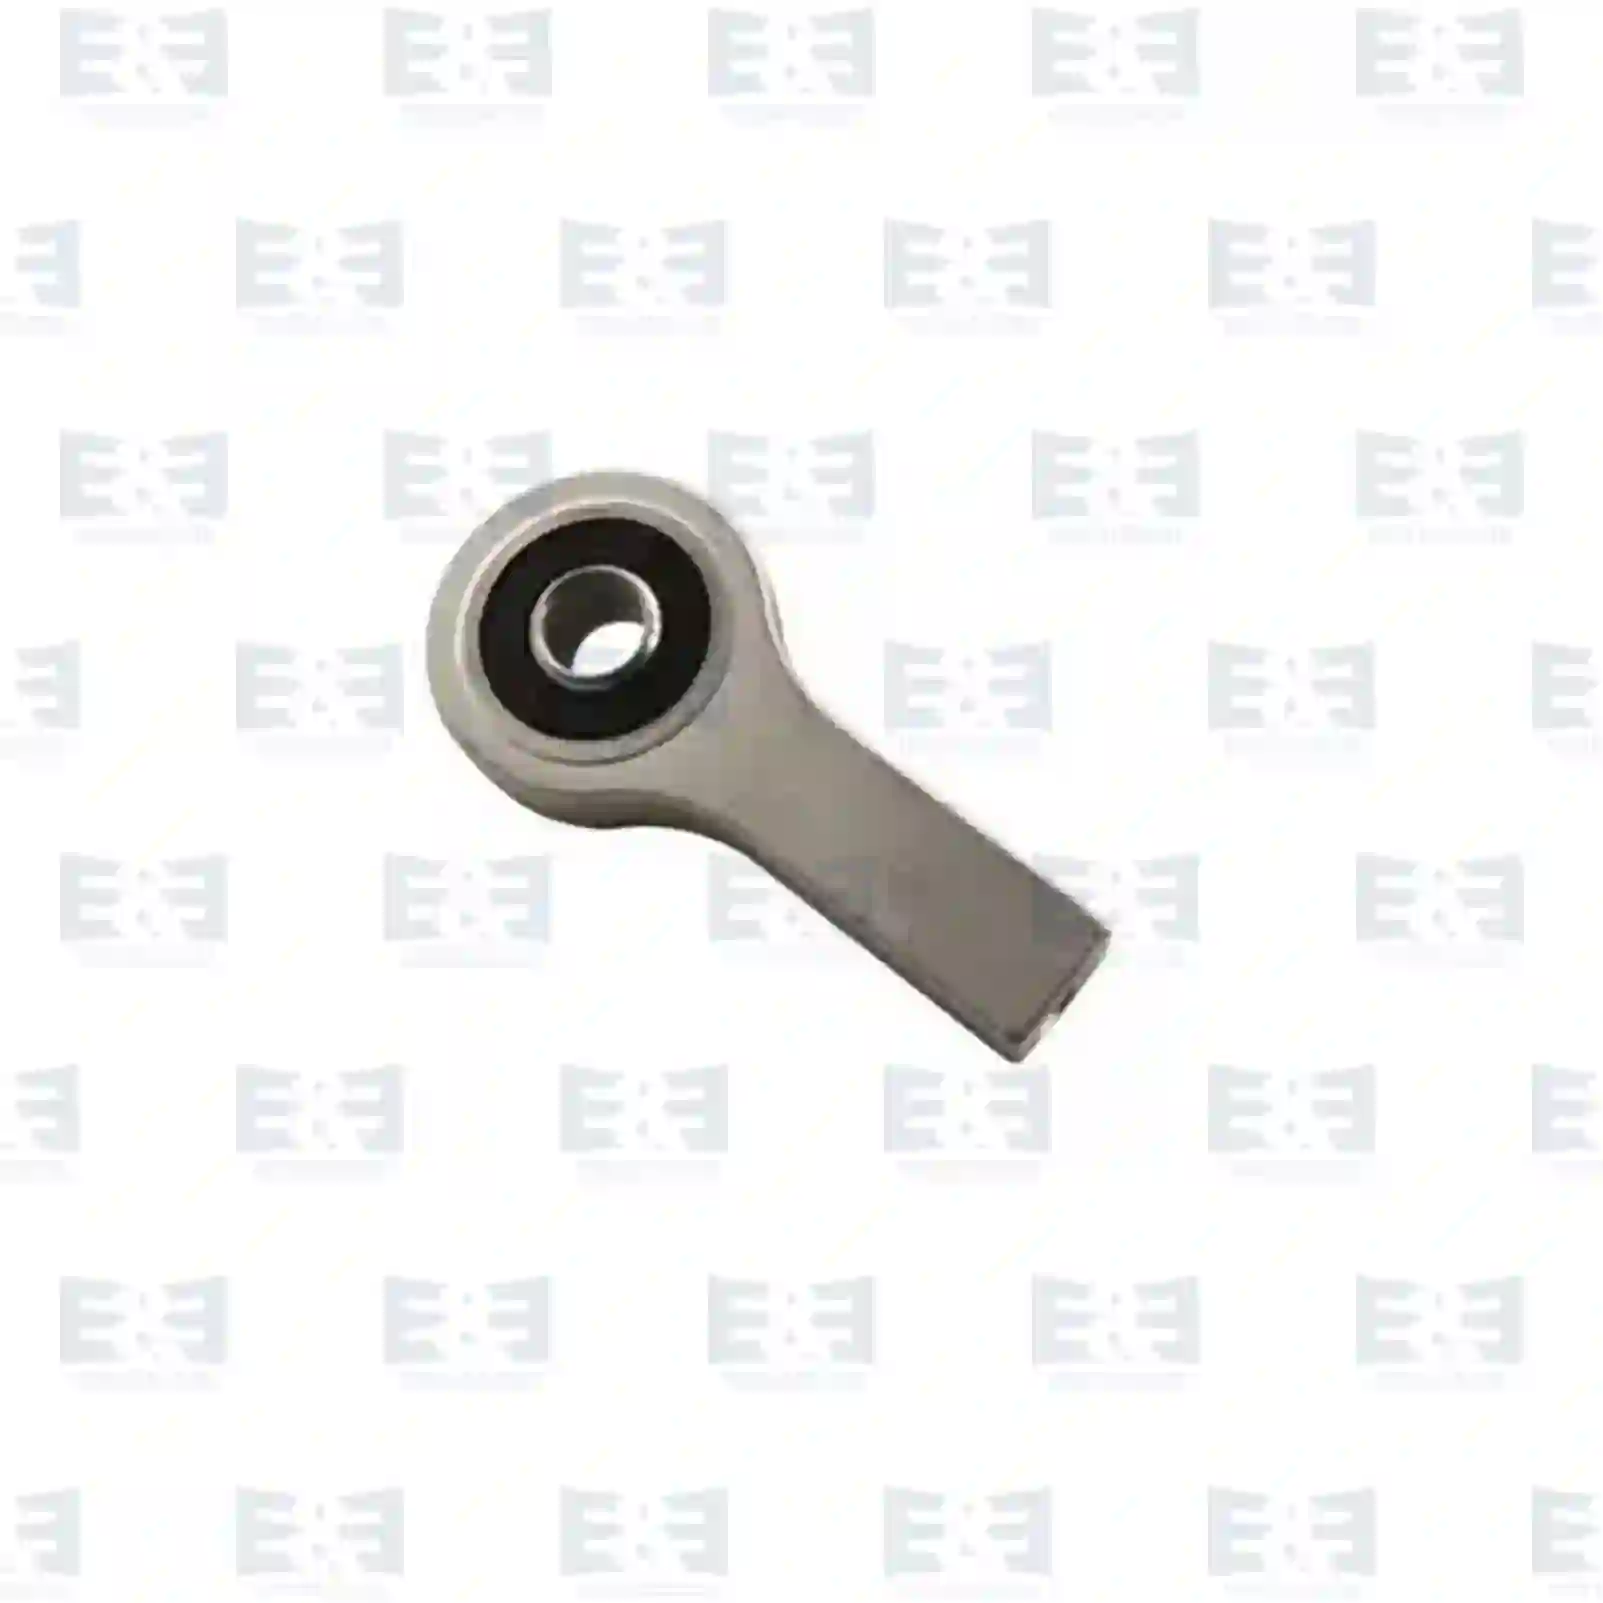 Bearing joint, cabin shock absorber, 2E2275136, 2094316, ZG40853-0008, ||  2E2275136 E&E Truck Spare Parts | Truck Spare Parts, Auotomotive Spare Parts Bearing joint, cabin shock absorber, 2E2275136, 2094316, ZG40853-0008, ||  2E2275136 E&E Truck Spare Parts | Truck Spare Parts, Auotomotive Spare Parts